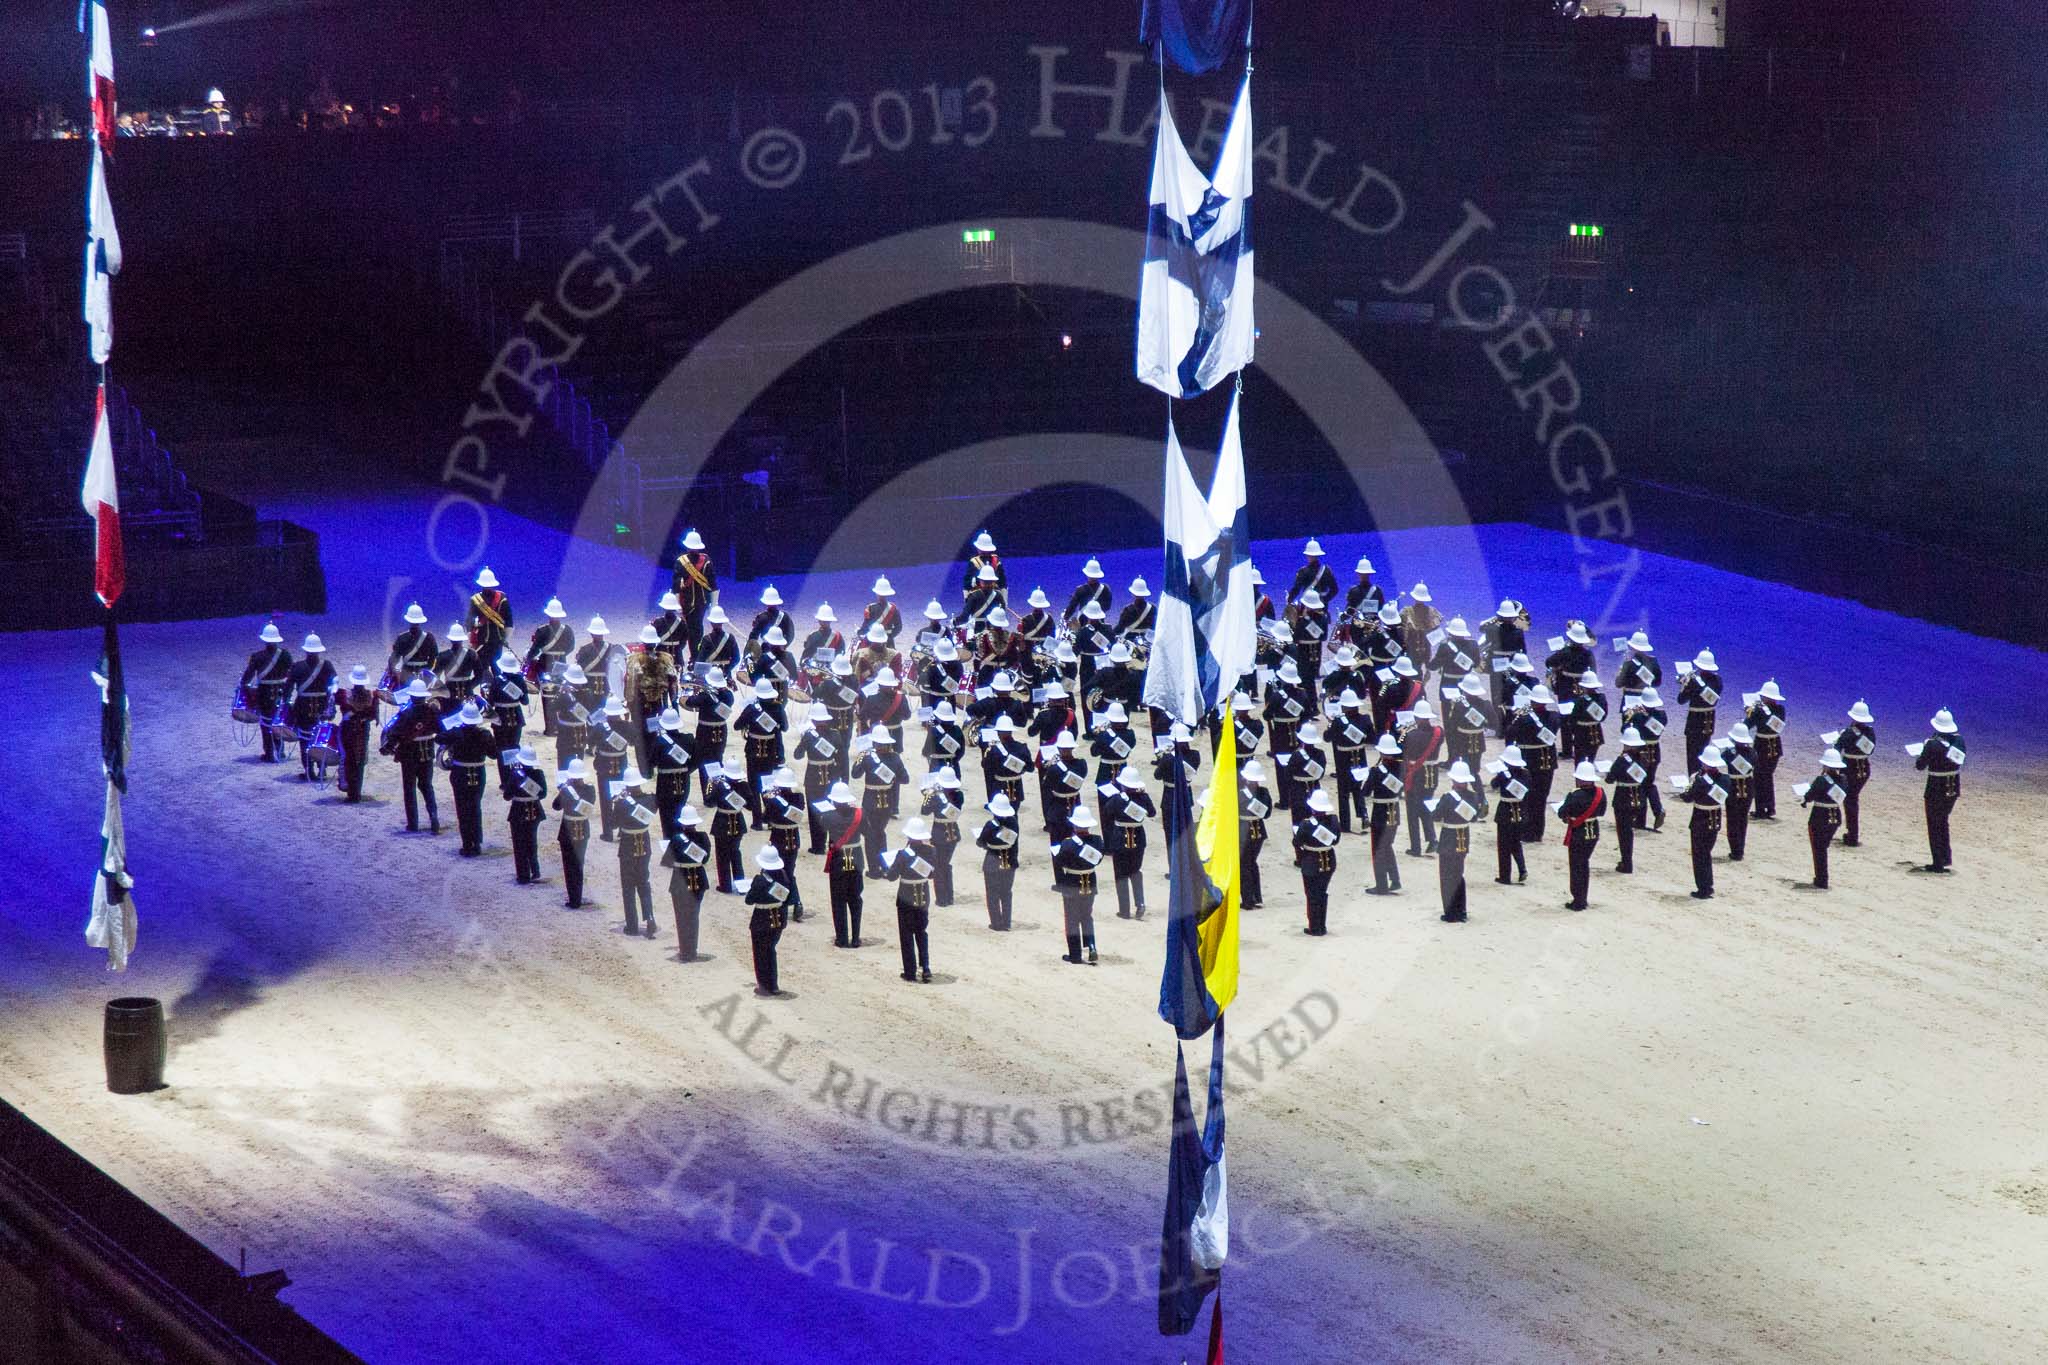 British Military Tournament 2013: The Royal Marines Massed Band..
Earls Court,
London SW5,

United Kingdom,
on 06 December 2013 at 14:49, image #43